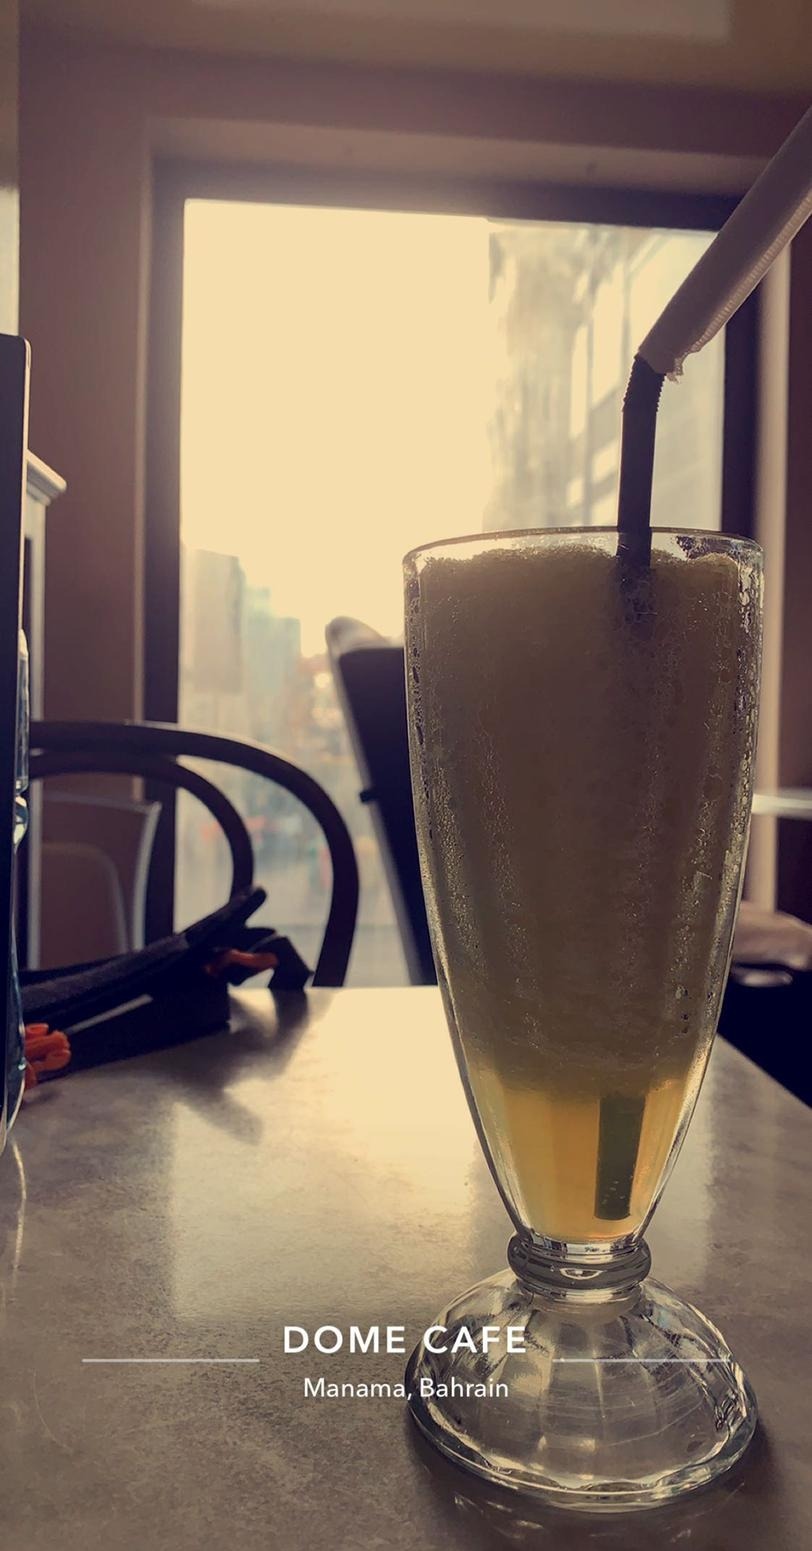 Iced lemon. Bad, was not fresh at all and tasted like syrup @ دوم - البحرين